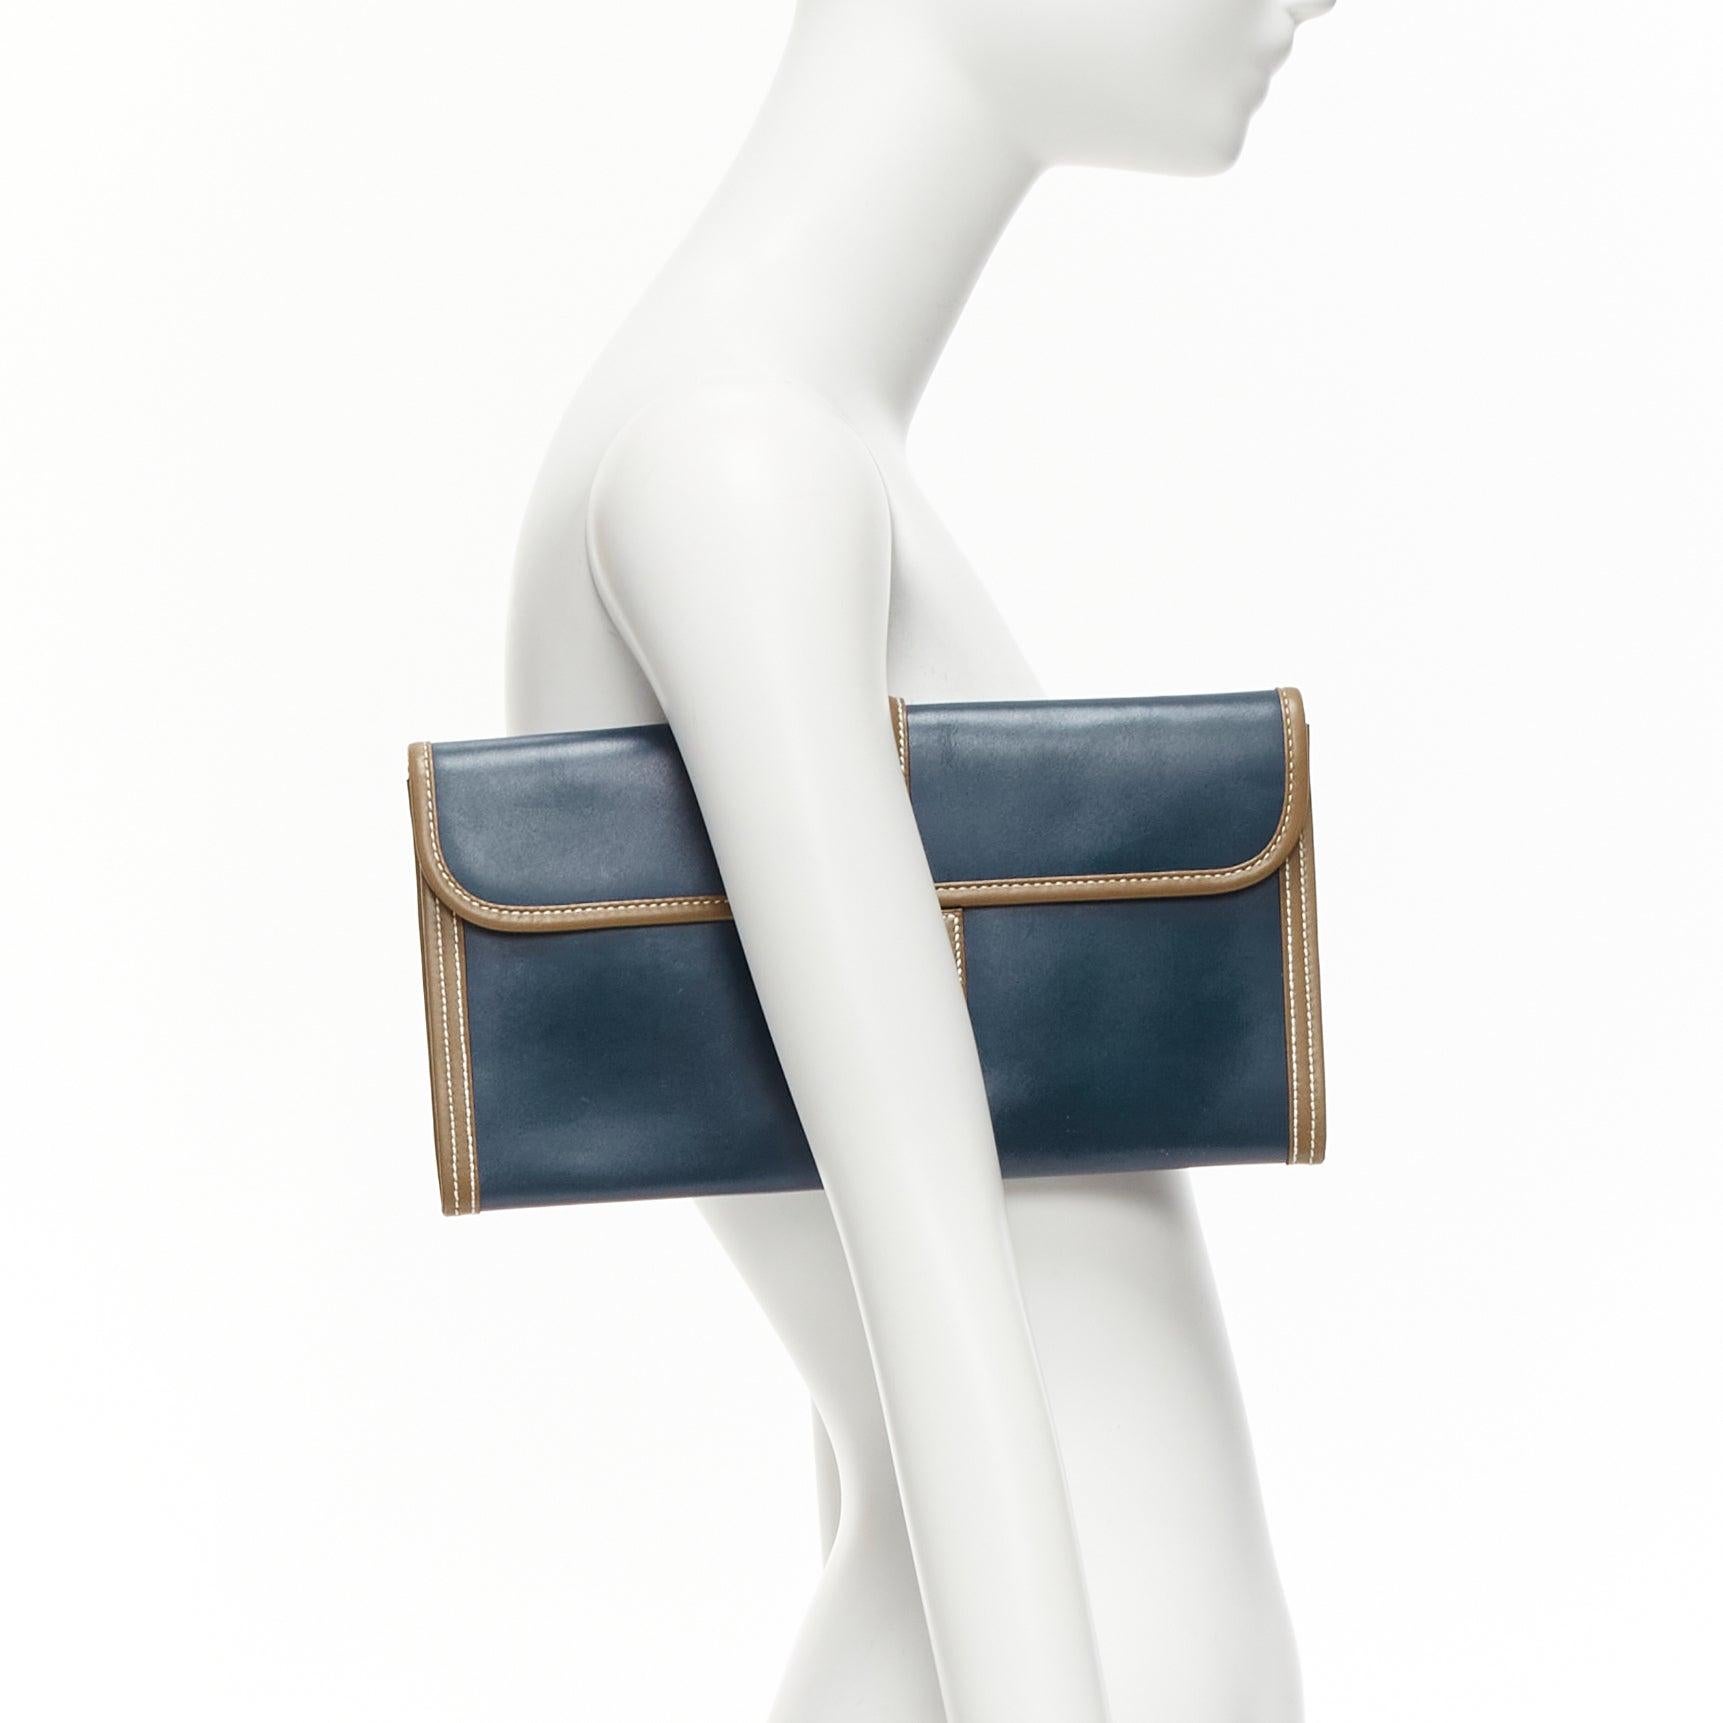 HERMES Jige Elan 29 blue taupe H logo swift leather loop through clutch bag
Reference: AAWC/A00943
Brand: Hermes
Model: Jige Elan 29
Material: Leather
Color: Blue, Brown
Pattern: Solid
Closure: Loop Through
Lining: Blue Leather
Extra Details: This